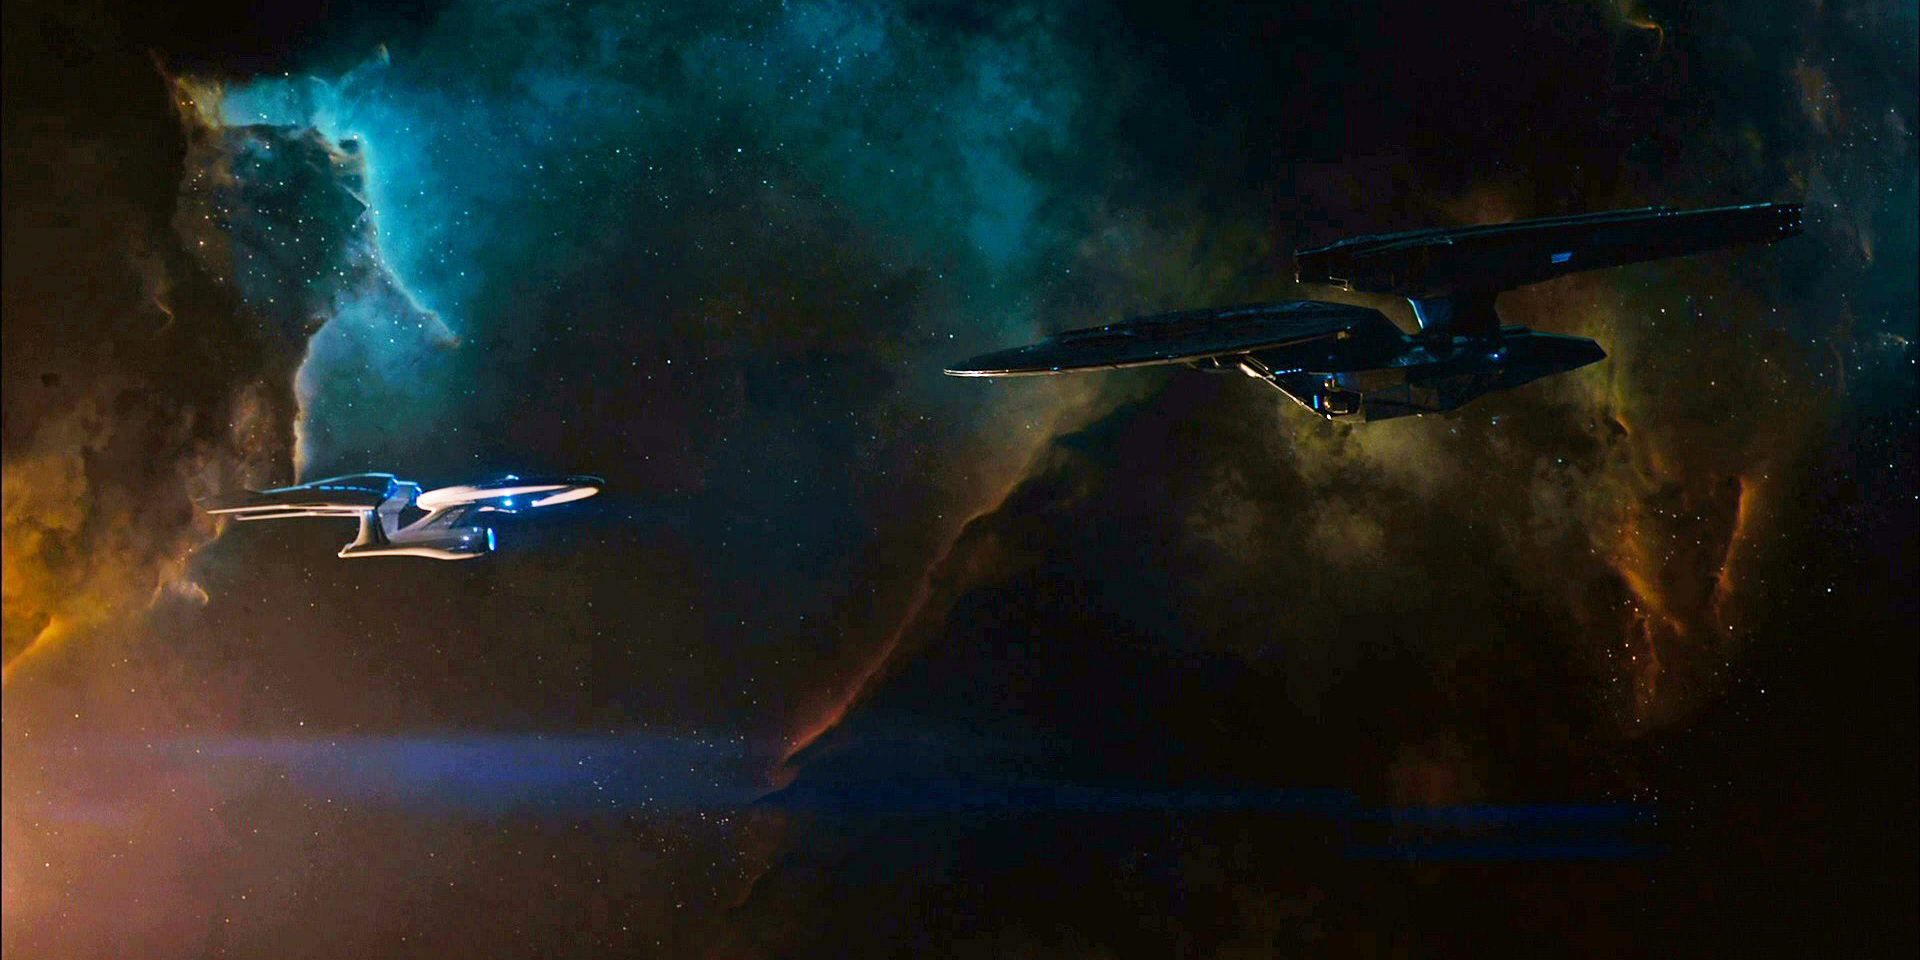 The USS Enterprise and USS Vengeance face off